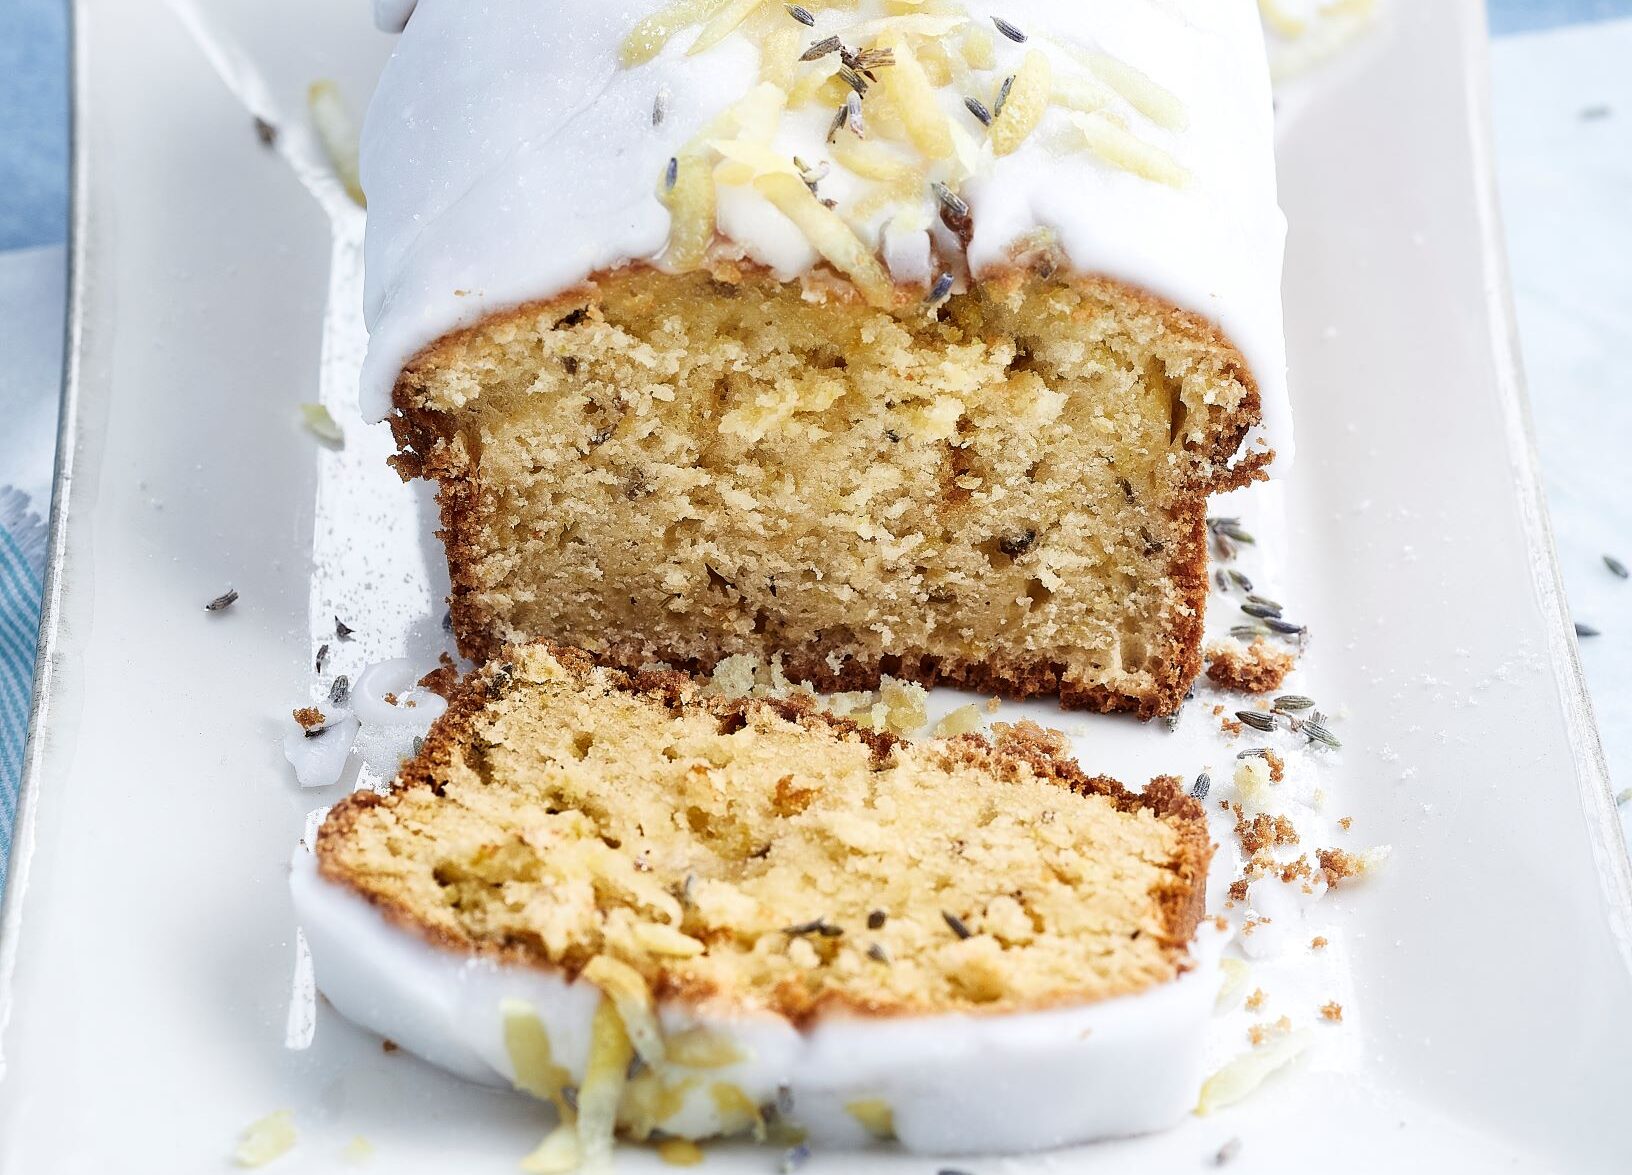 Image of a Lemon and Lavender Cake in a loaf shape and white icing over the top, the first piece has been sliced and is lying in front of the cake.